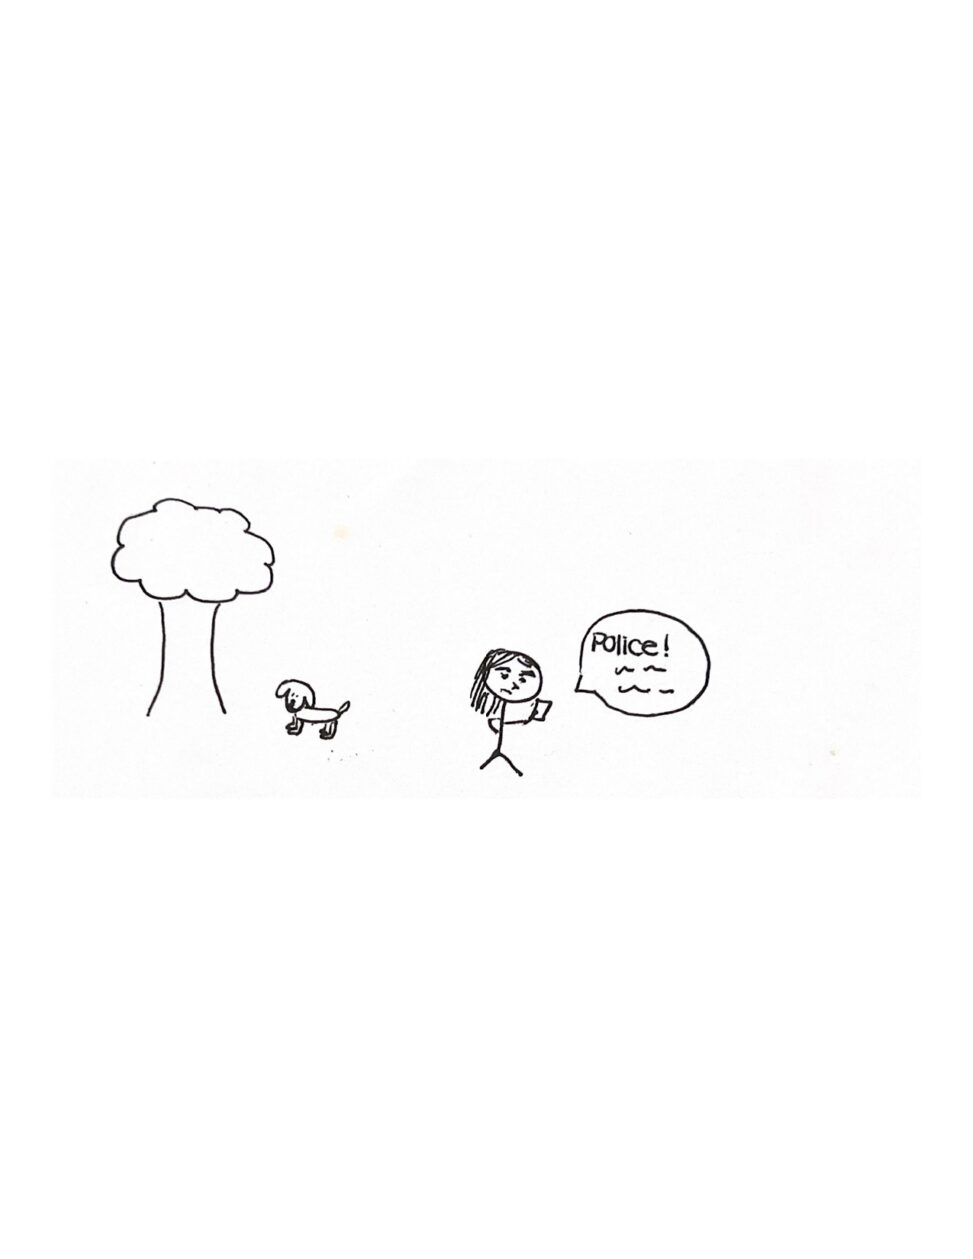 The stick figure, me, is on the phone with the police. There is a dog standing alone next to a tree.